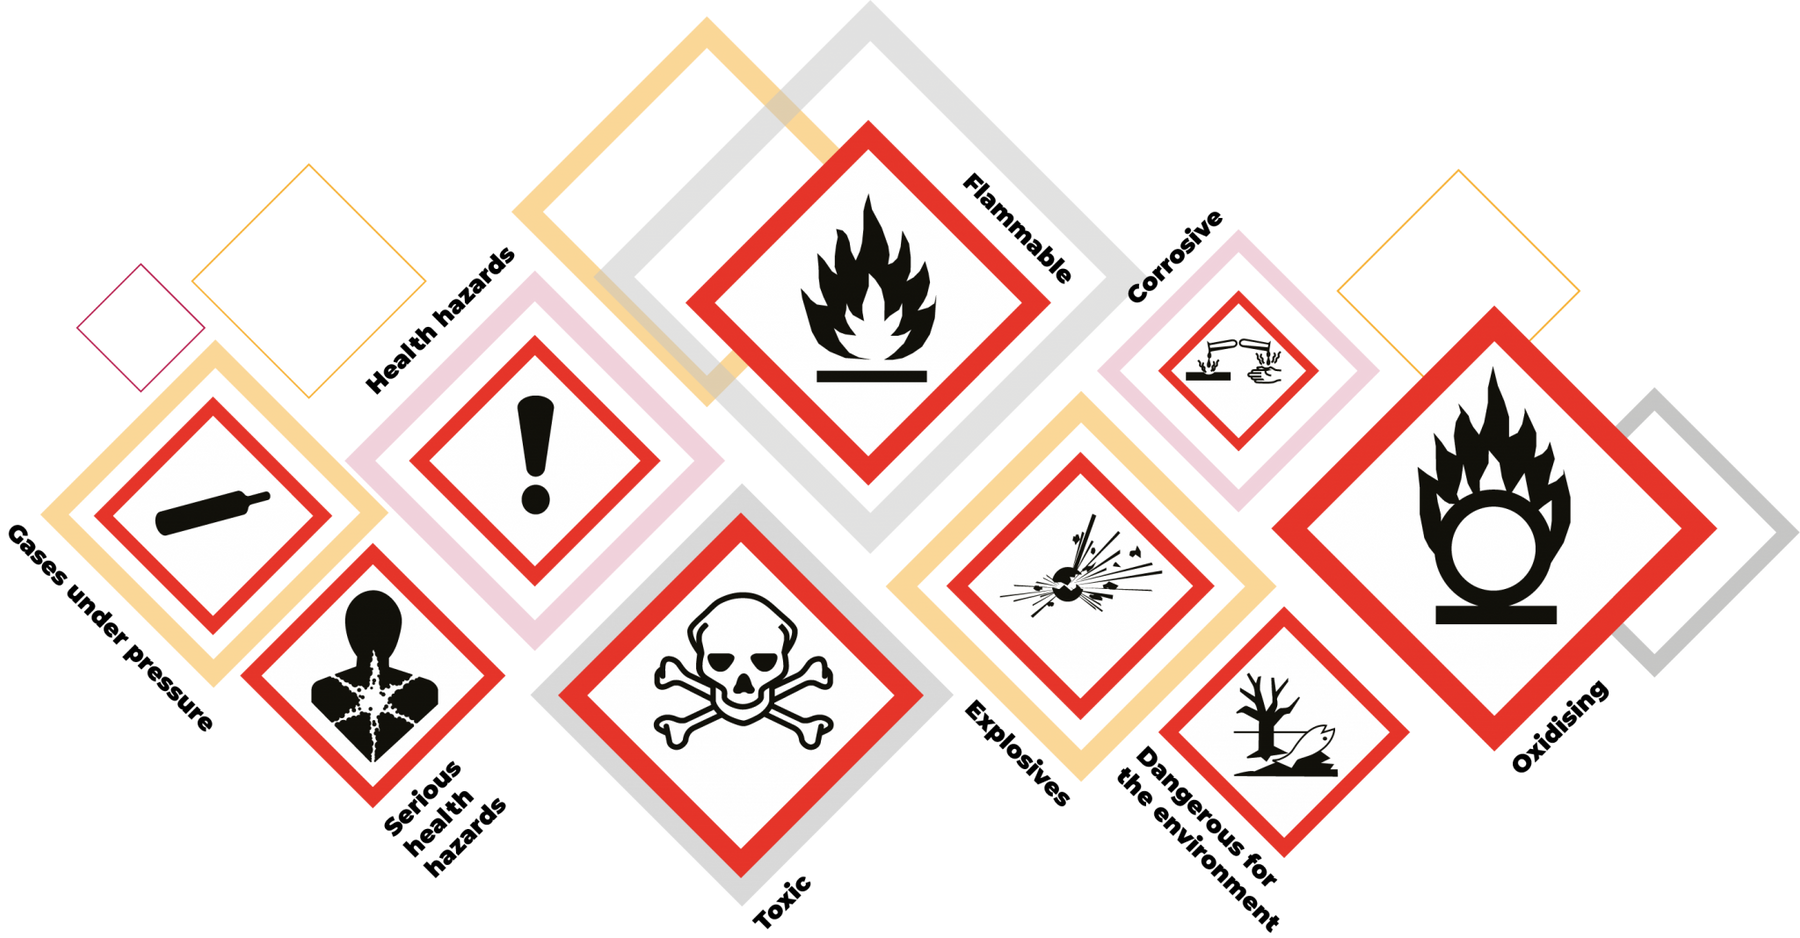 Methyl Ethyl Ketoxime (MEKO): Applications, Products, and Safety Measures